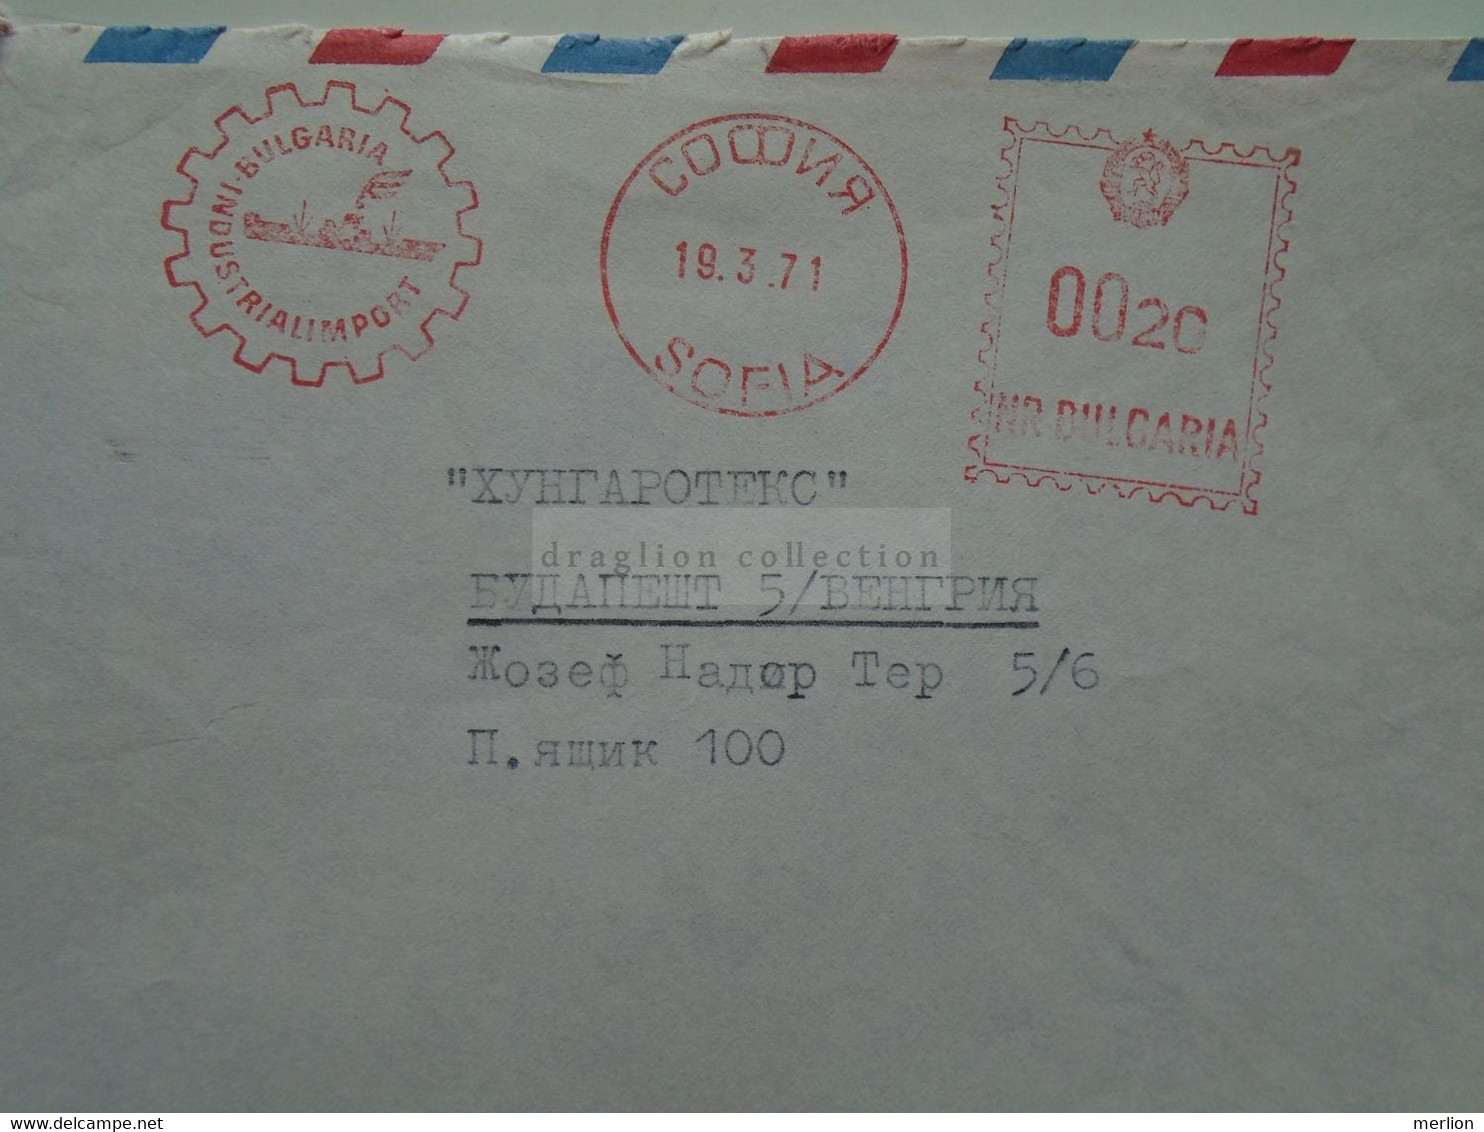 DC59.22  BULGARIA  1971 Sofia Industrialimport  - ADVERTISING  METER FRANKING COVER  - EMA- FREISTEMPEL - Covers & Documents